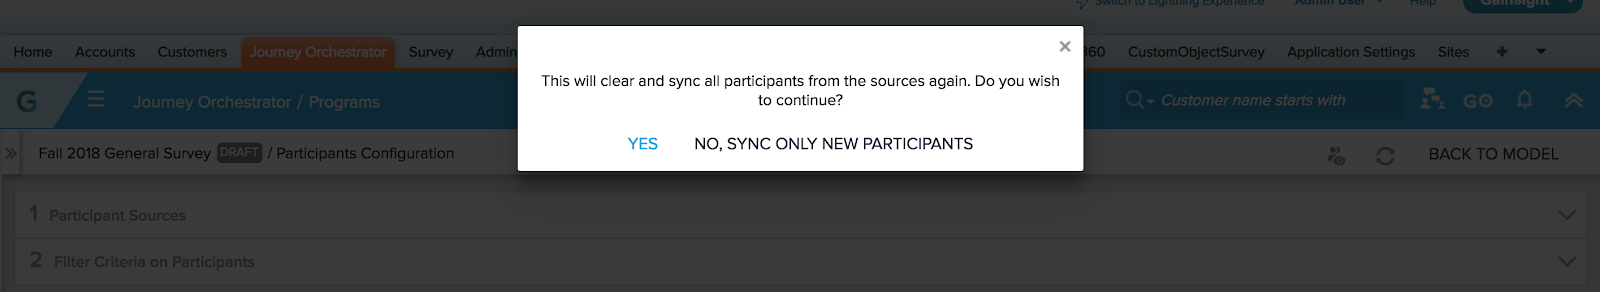 10 SYNC ONLY NEW PARTICIPANTS.png